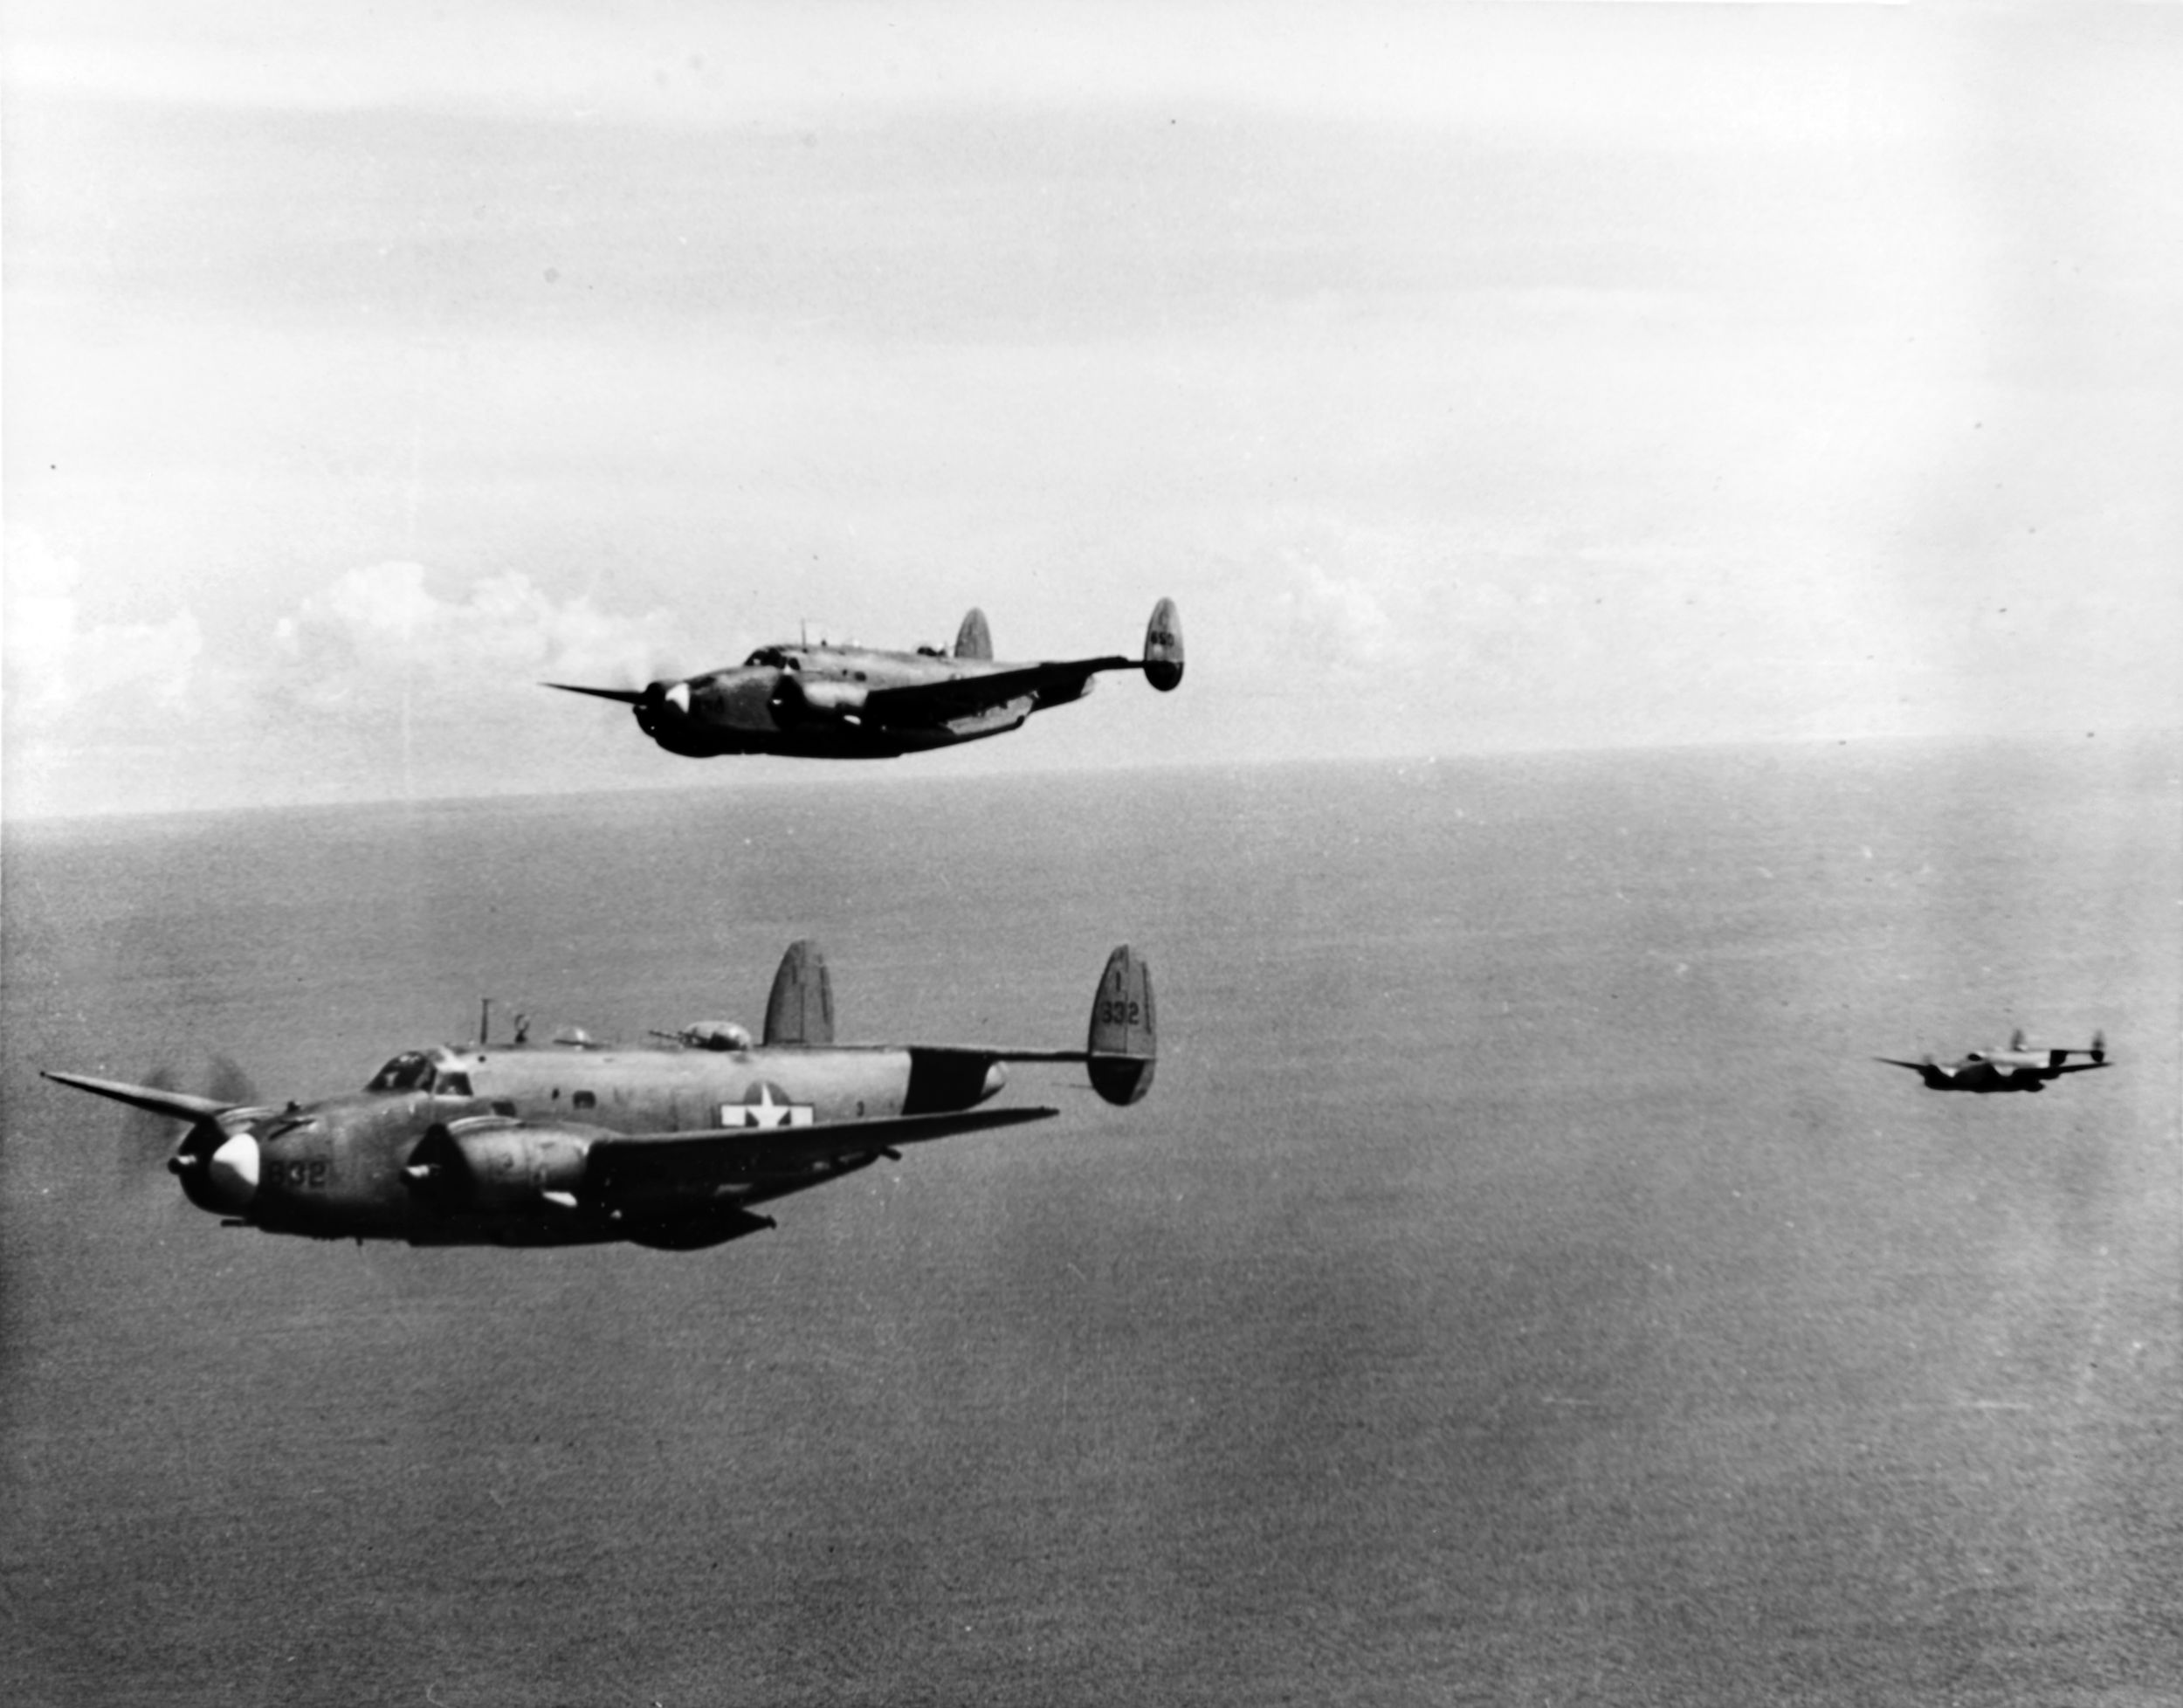 A pair of Lockheed Ventura bombers wings their way toward Brunei on the island of Borneo in early 1945. These aircraft are armed with rockets and bombs to carry out their mission.